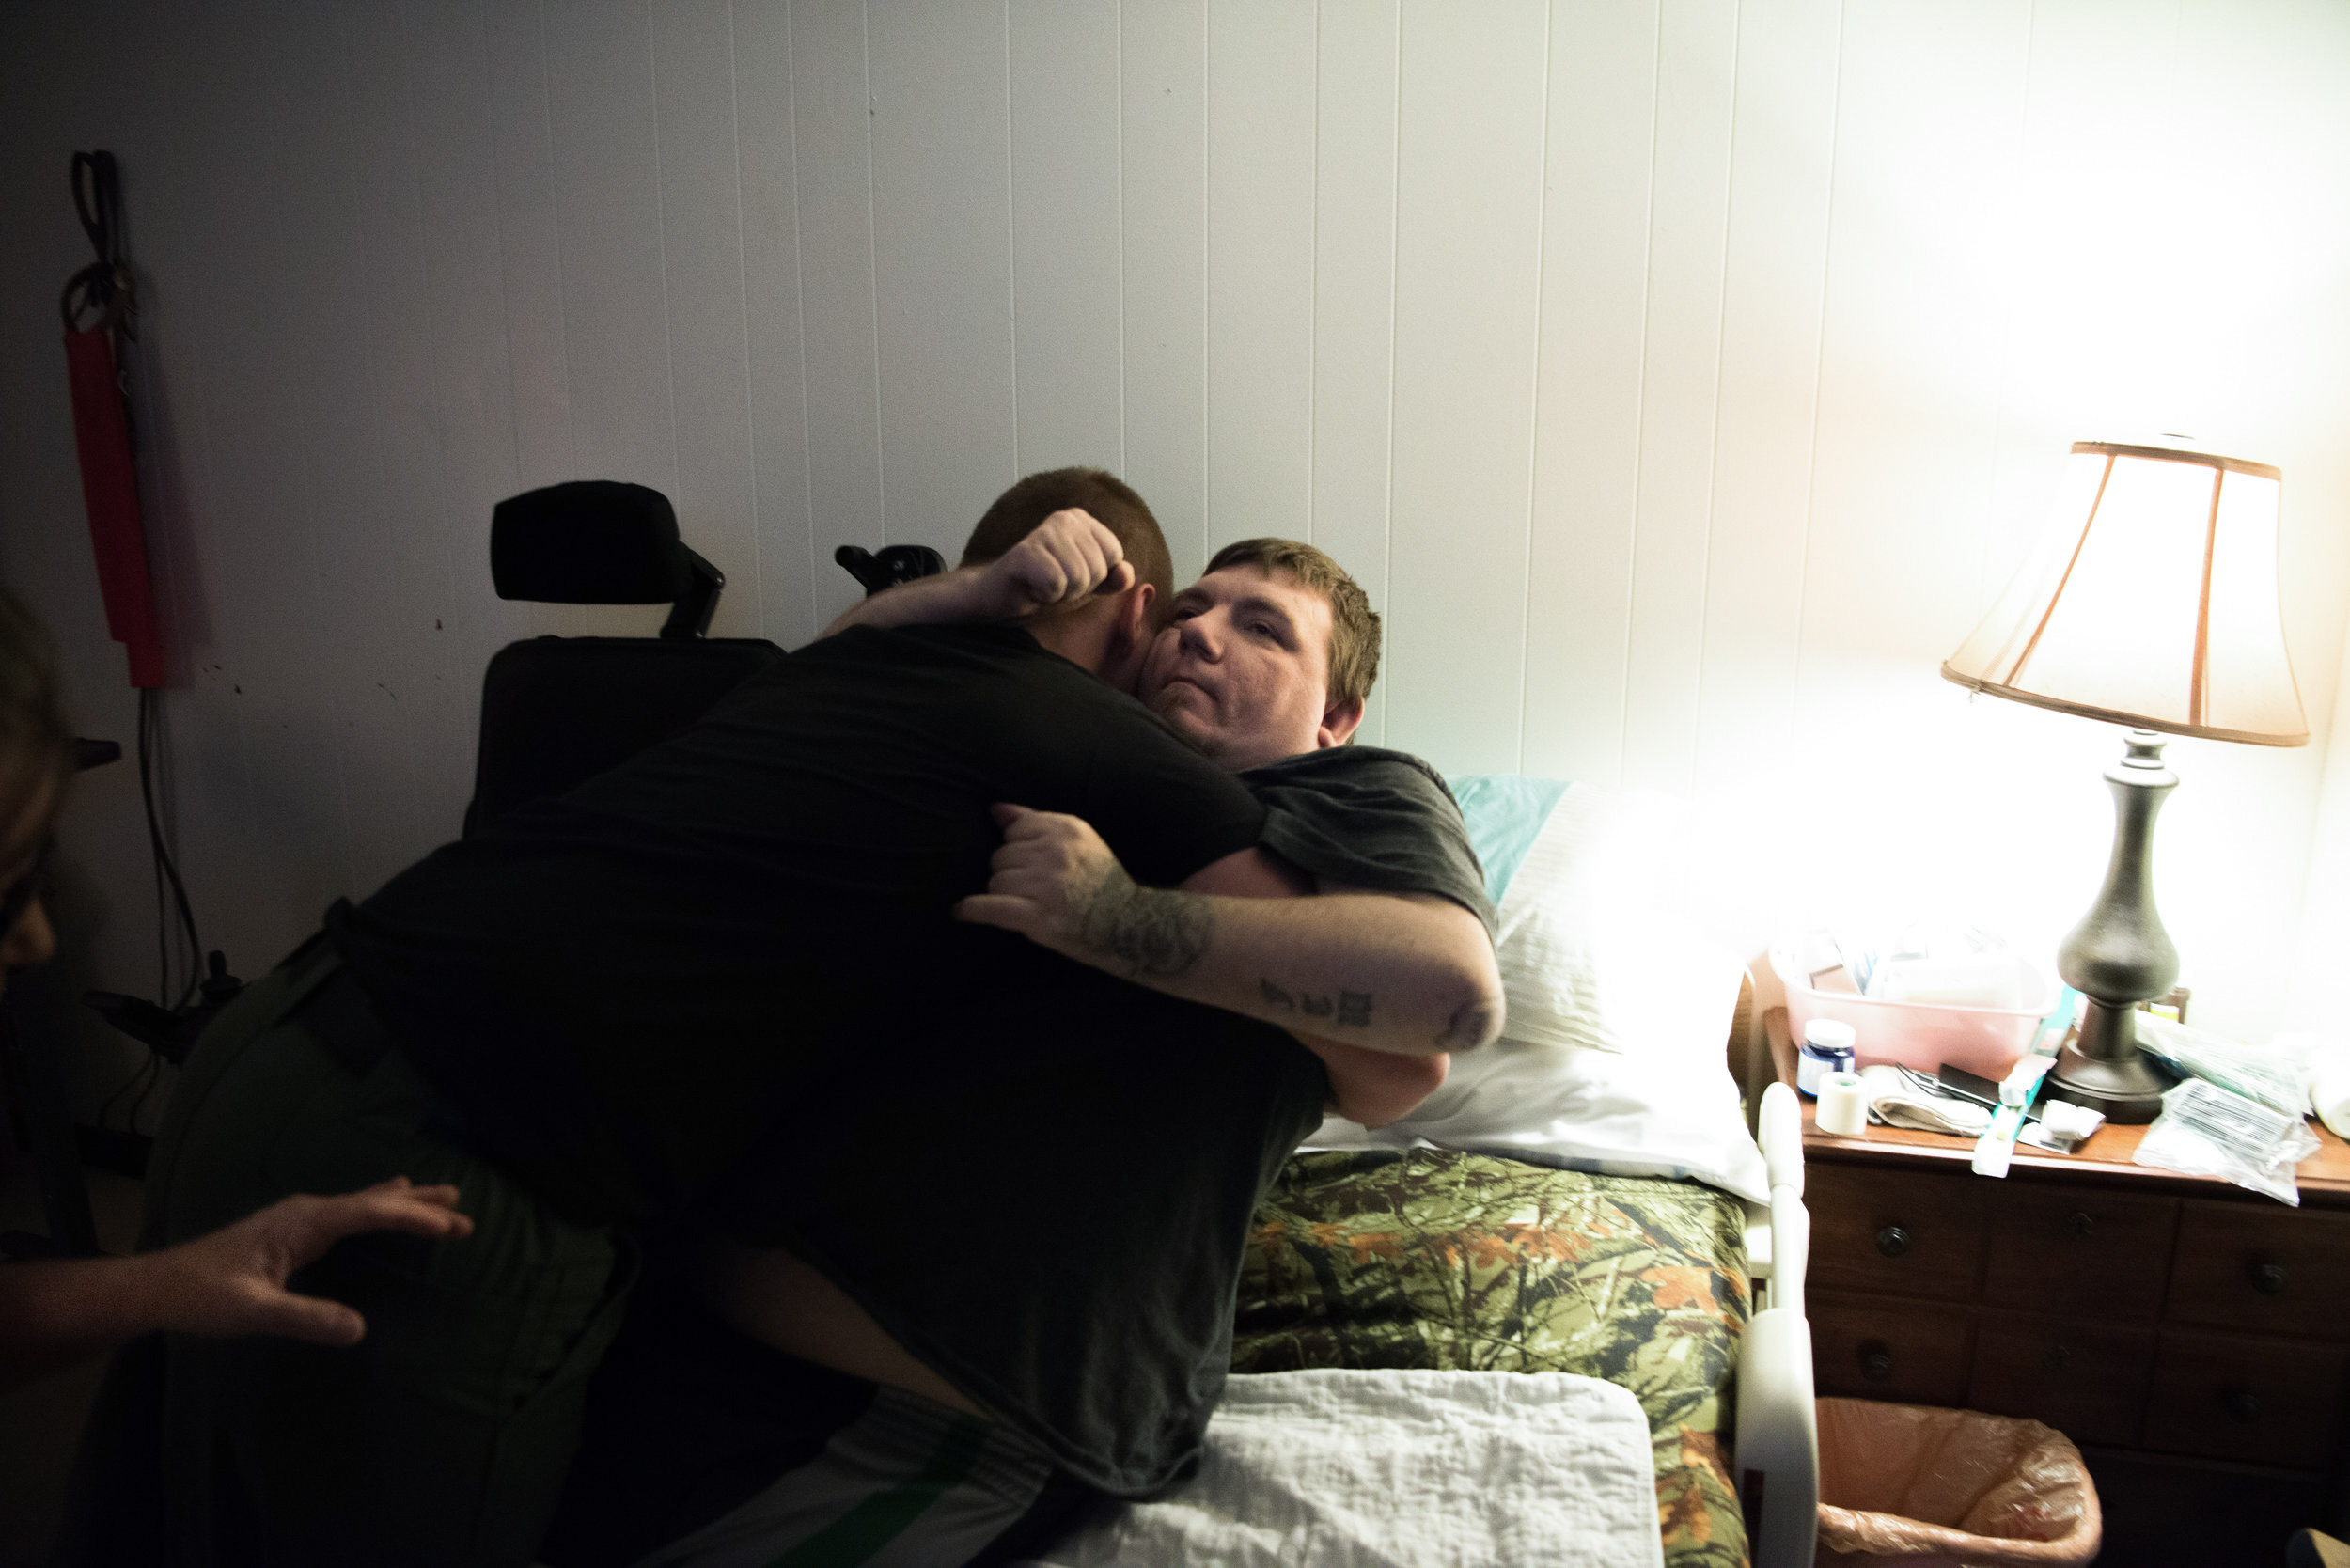  Adam’s cousin lifts him into bed after his sister forgot to stop by and help Chery move him. Chery is unable to make the transfer herself and usually relies on Adam’s aid or other family members. &nbsp; 